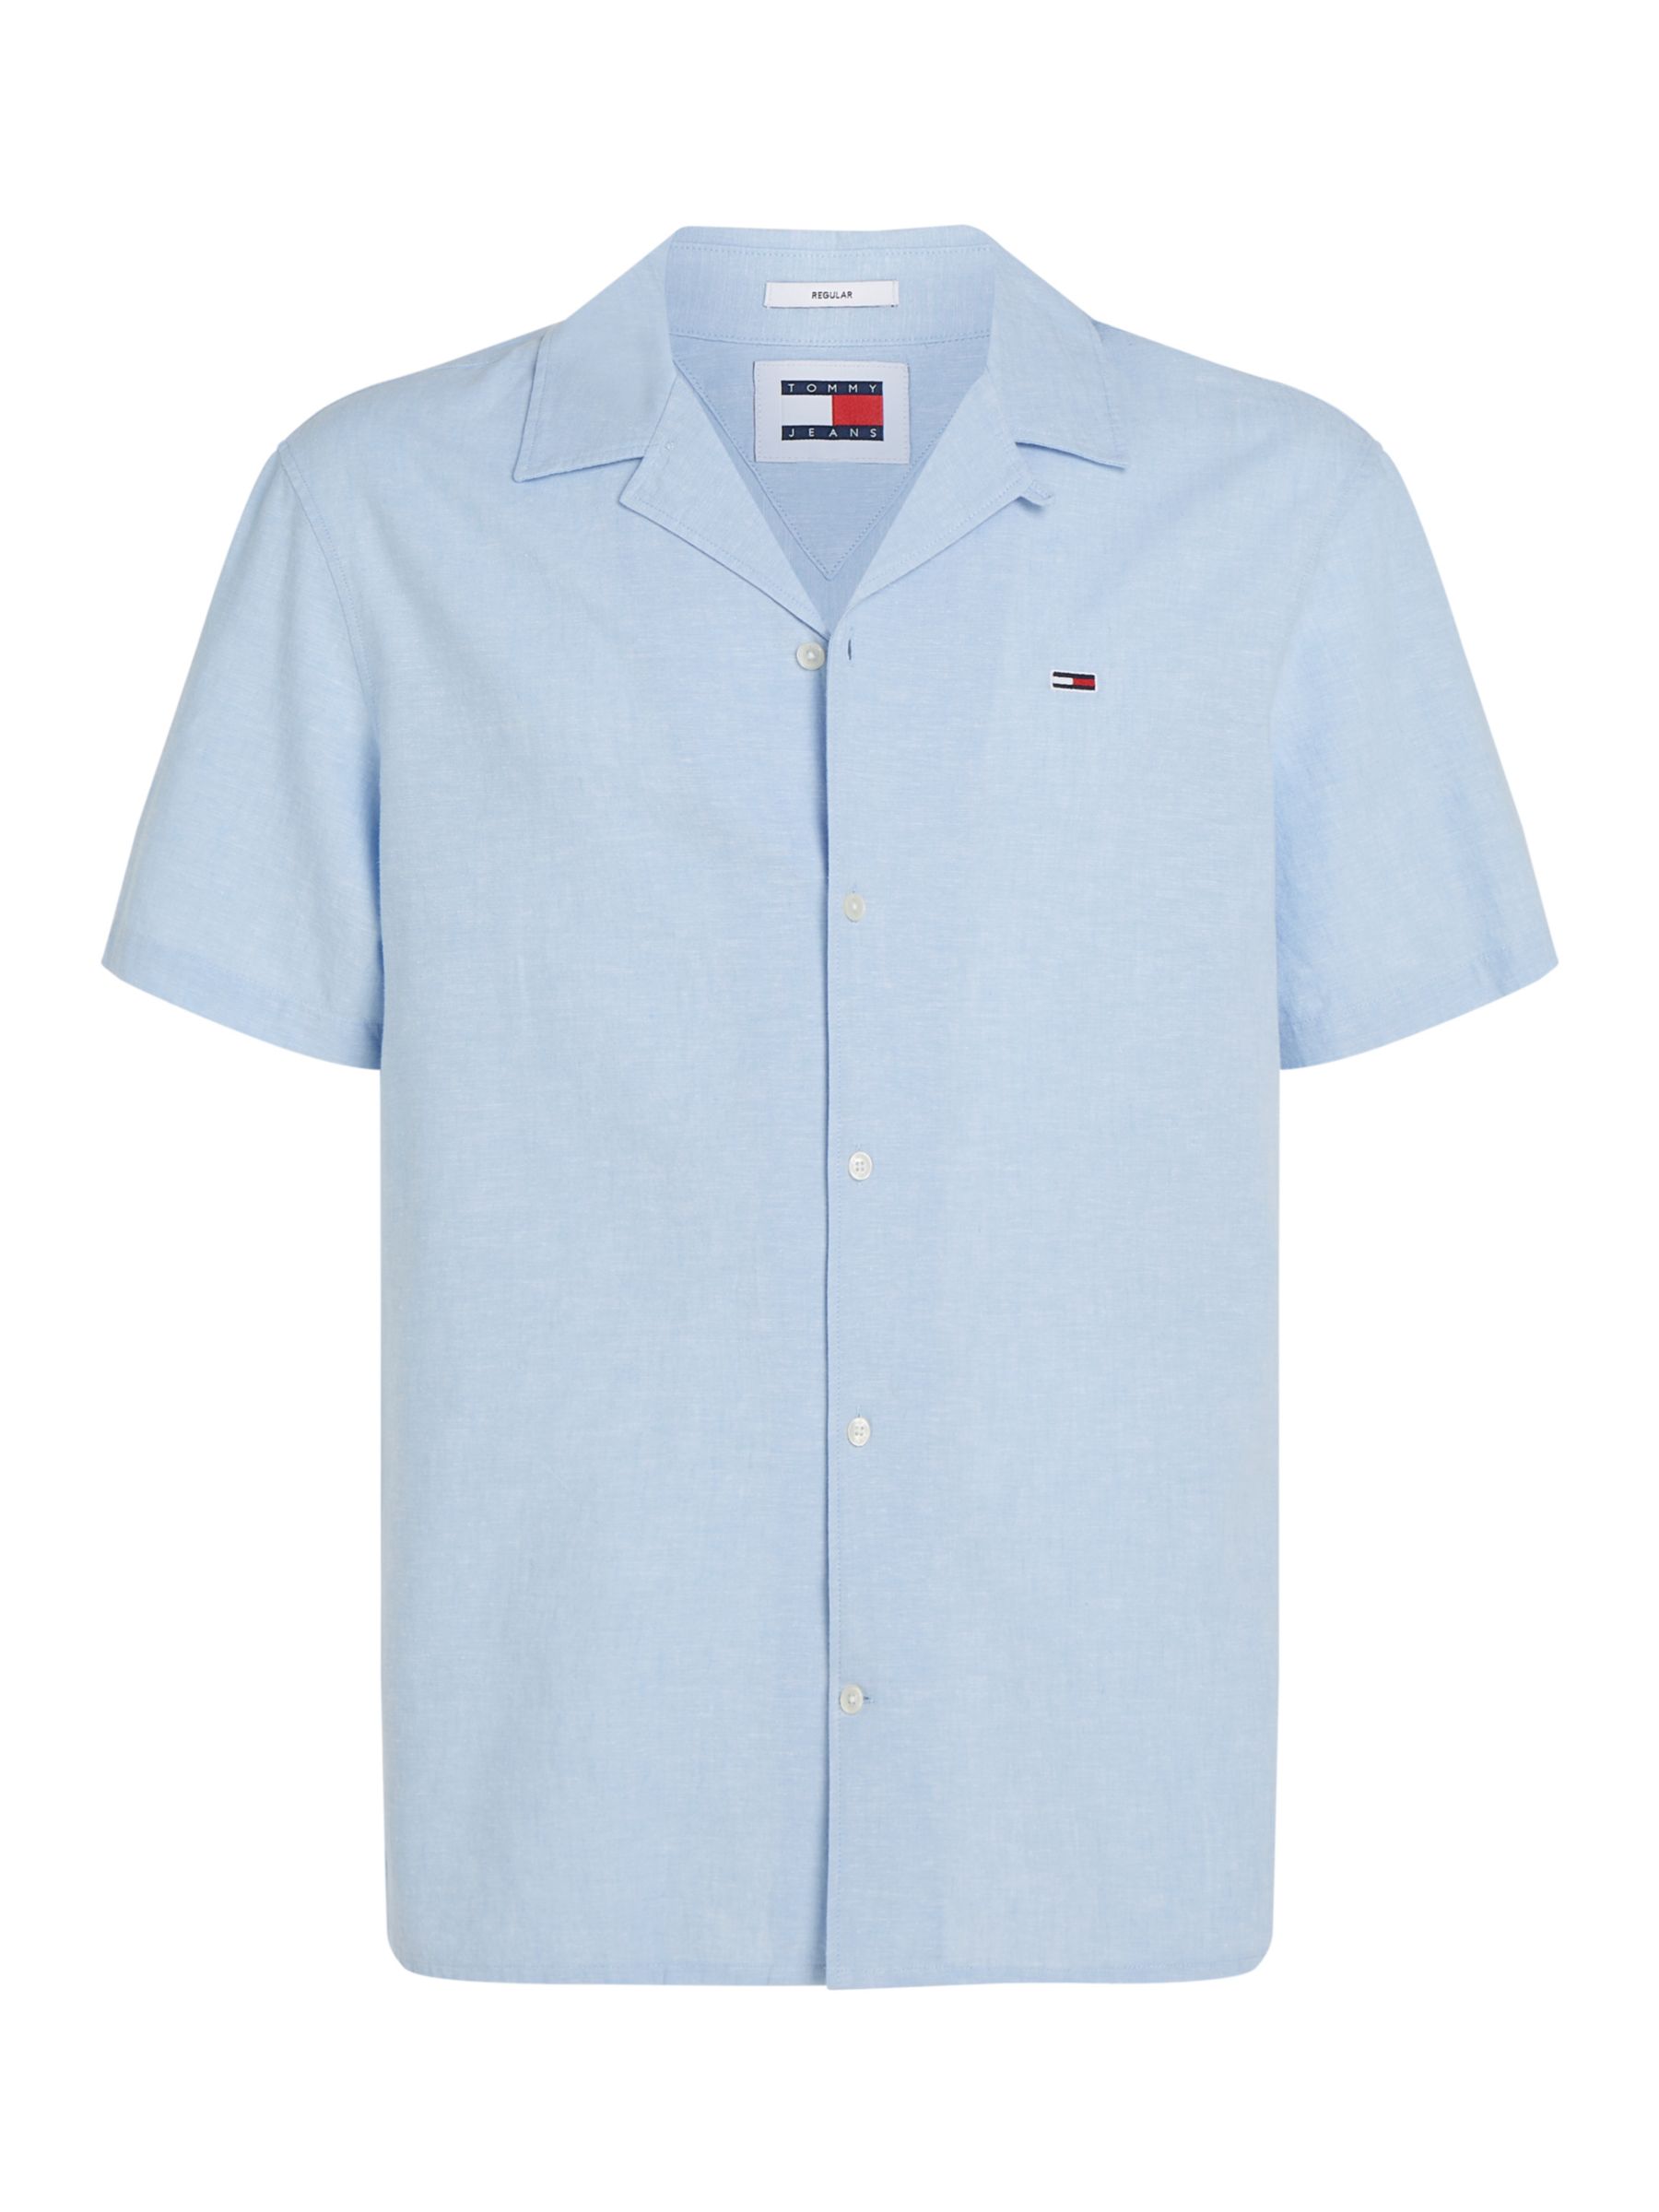 Tommy Jeans Camp Shirt, Moderate Blue, S